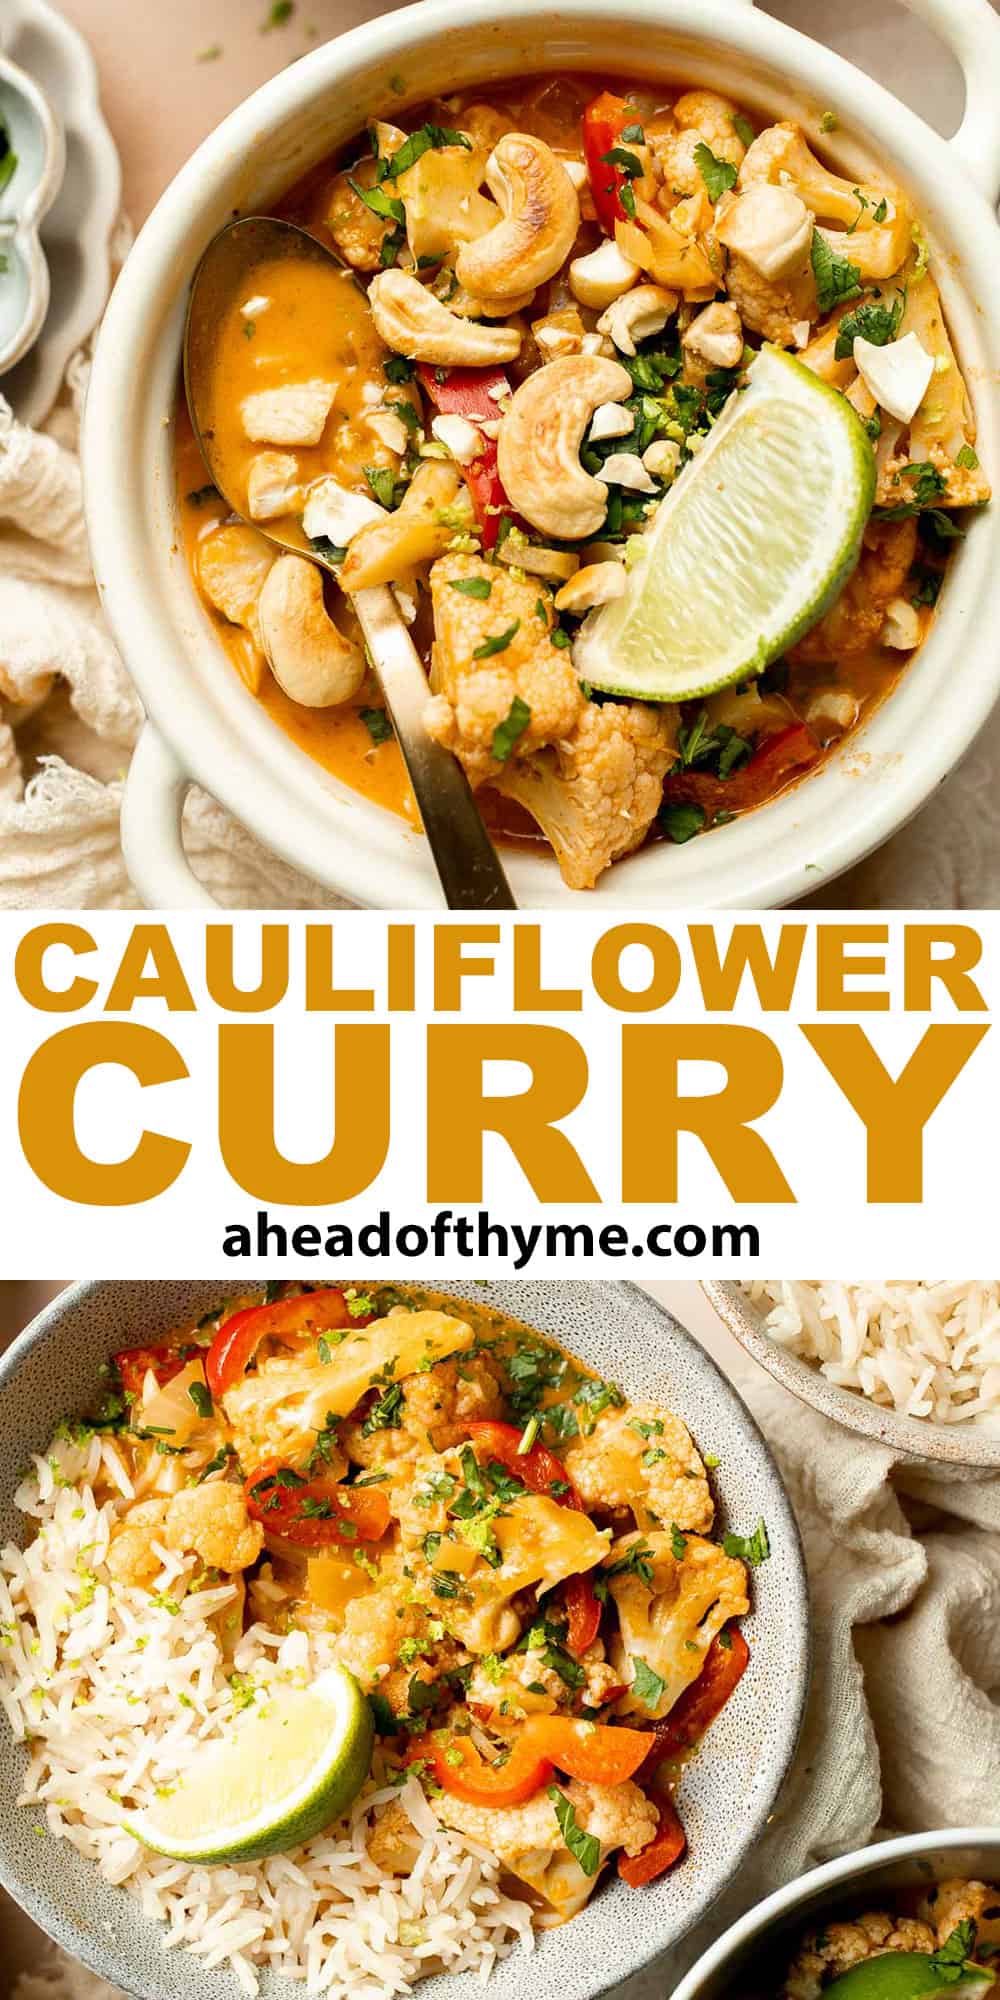 This creamy Cauliflower Curry is a quick and easy, one pot vegan meal that is ready in 25 minutes. Ditch the takeout and make this for weeknight dinner! | aheadofthyme.com